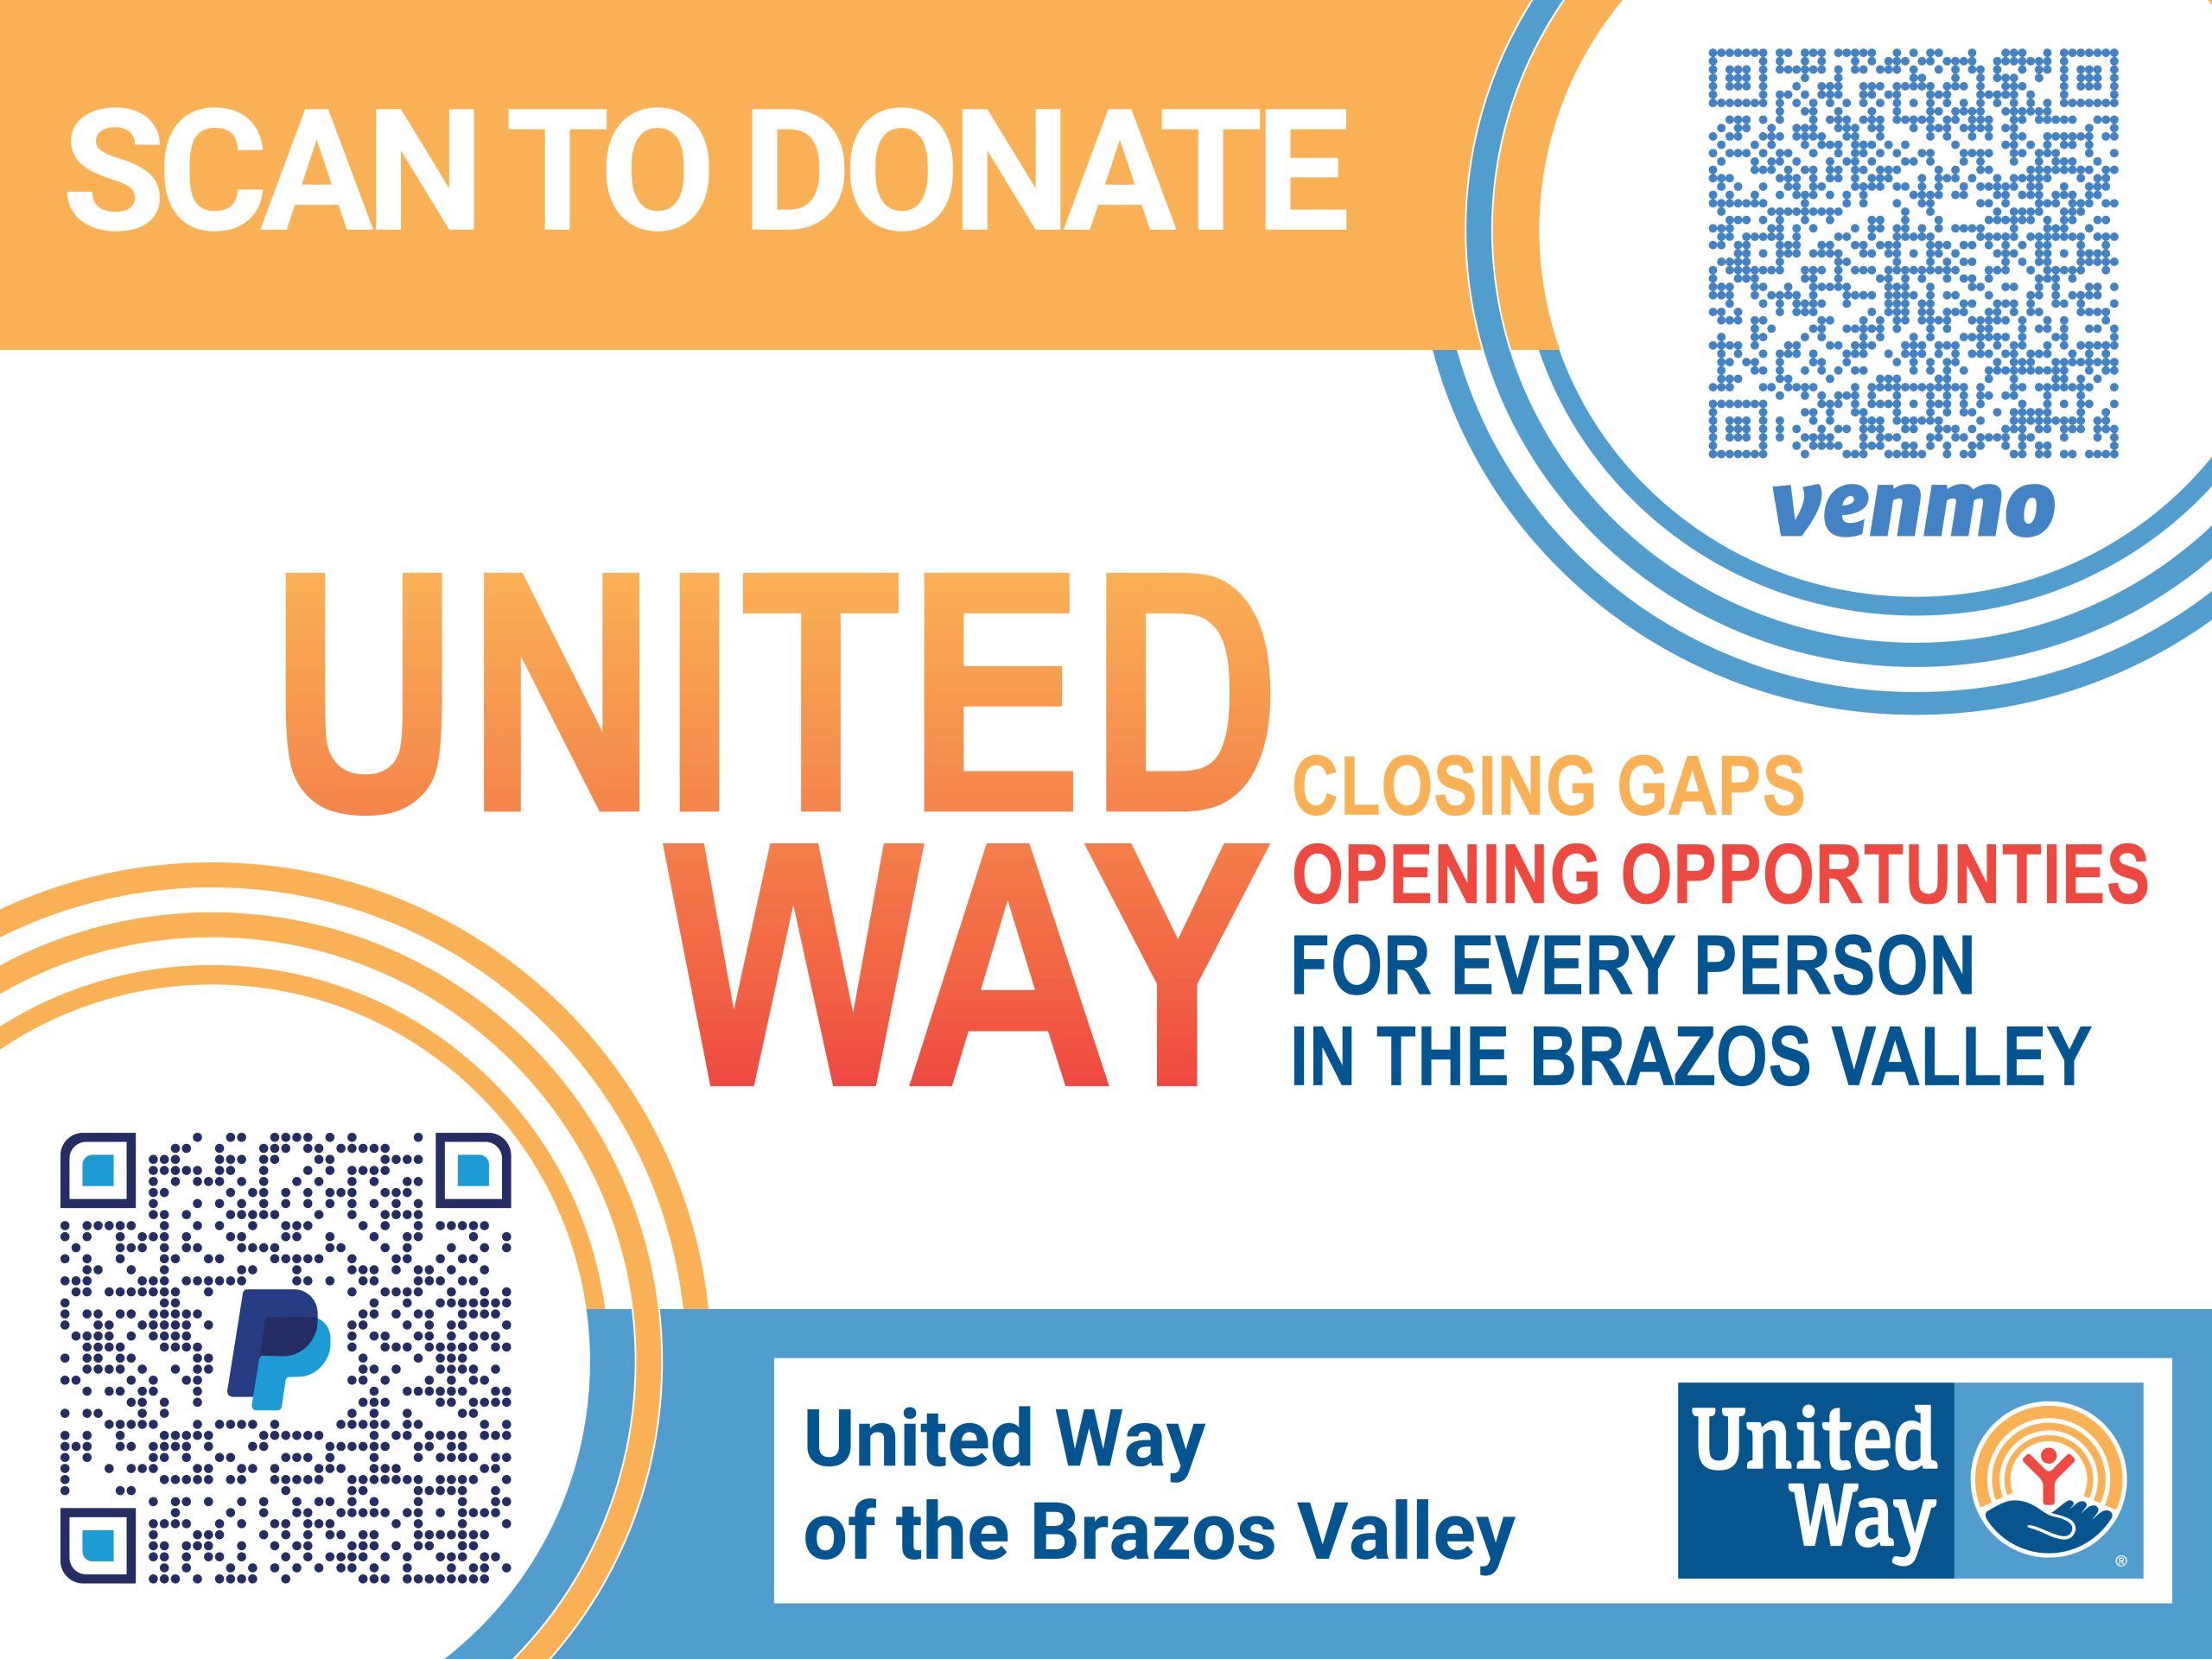 Venmo and Paypal QR codes for easy donating to united way of the brazos valley. paypal https://www.paypal.com/us/fundraiser/charity/2270301 and venmo @UnitedWayBV